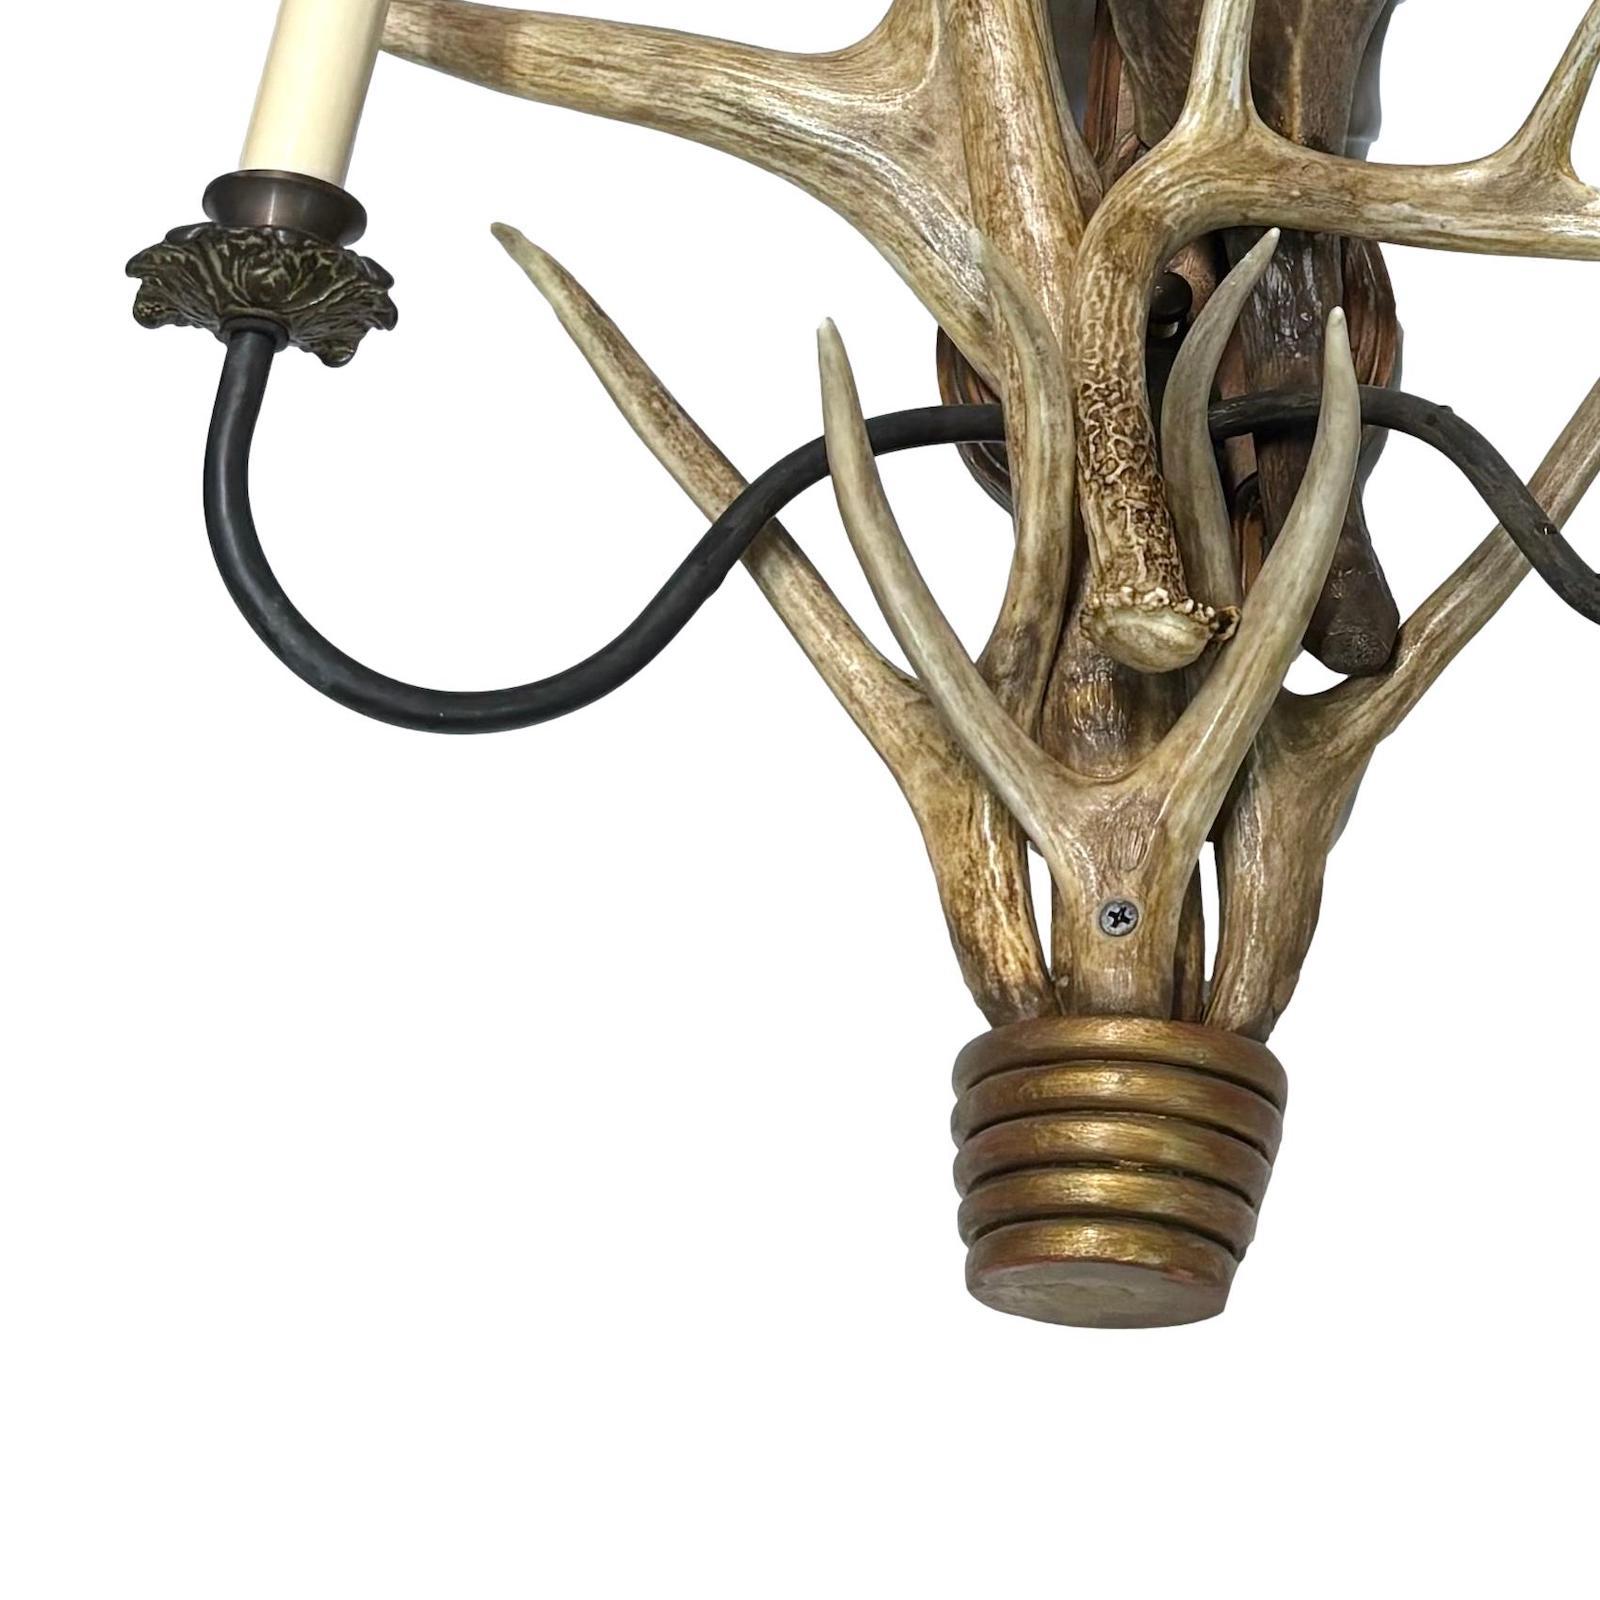 Pair of vintage circa 1930's Northern Italian antler sconces with 2 lights.

Measurements:
Height: 24